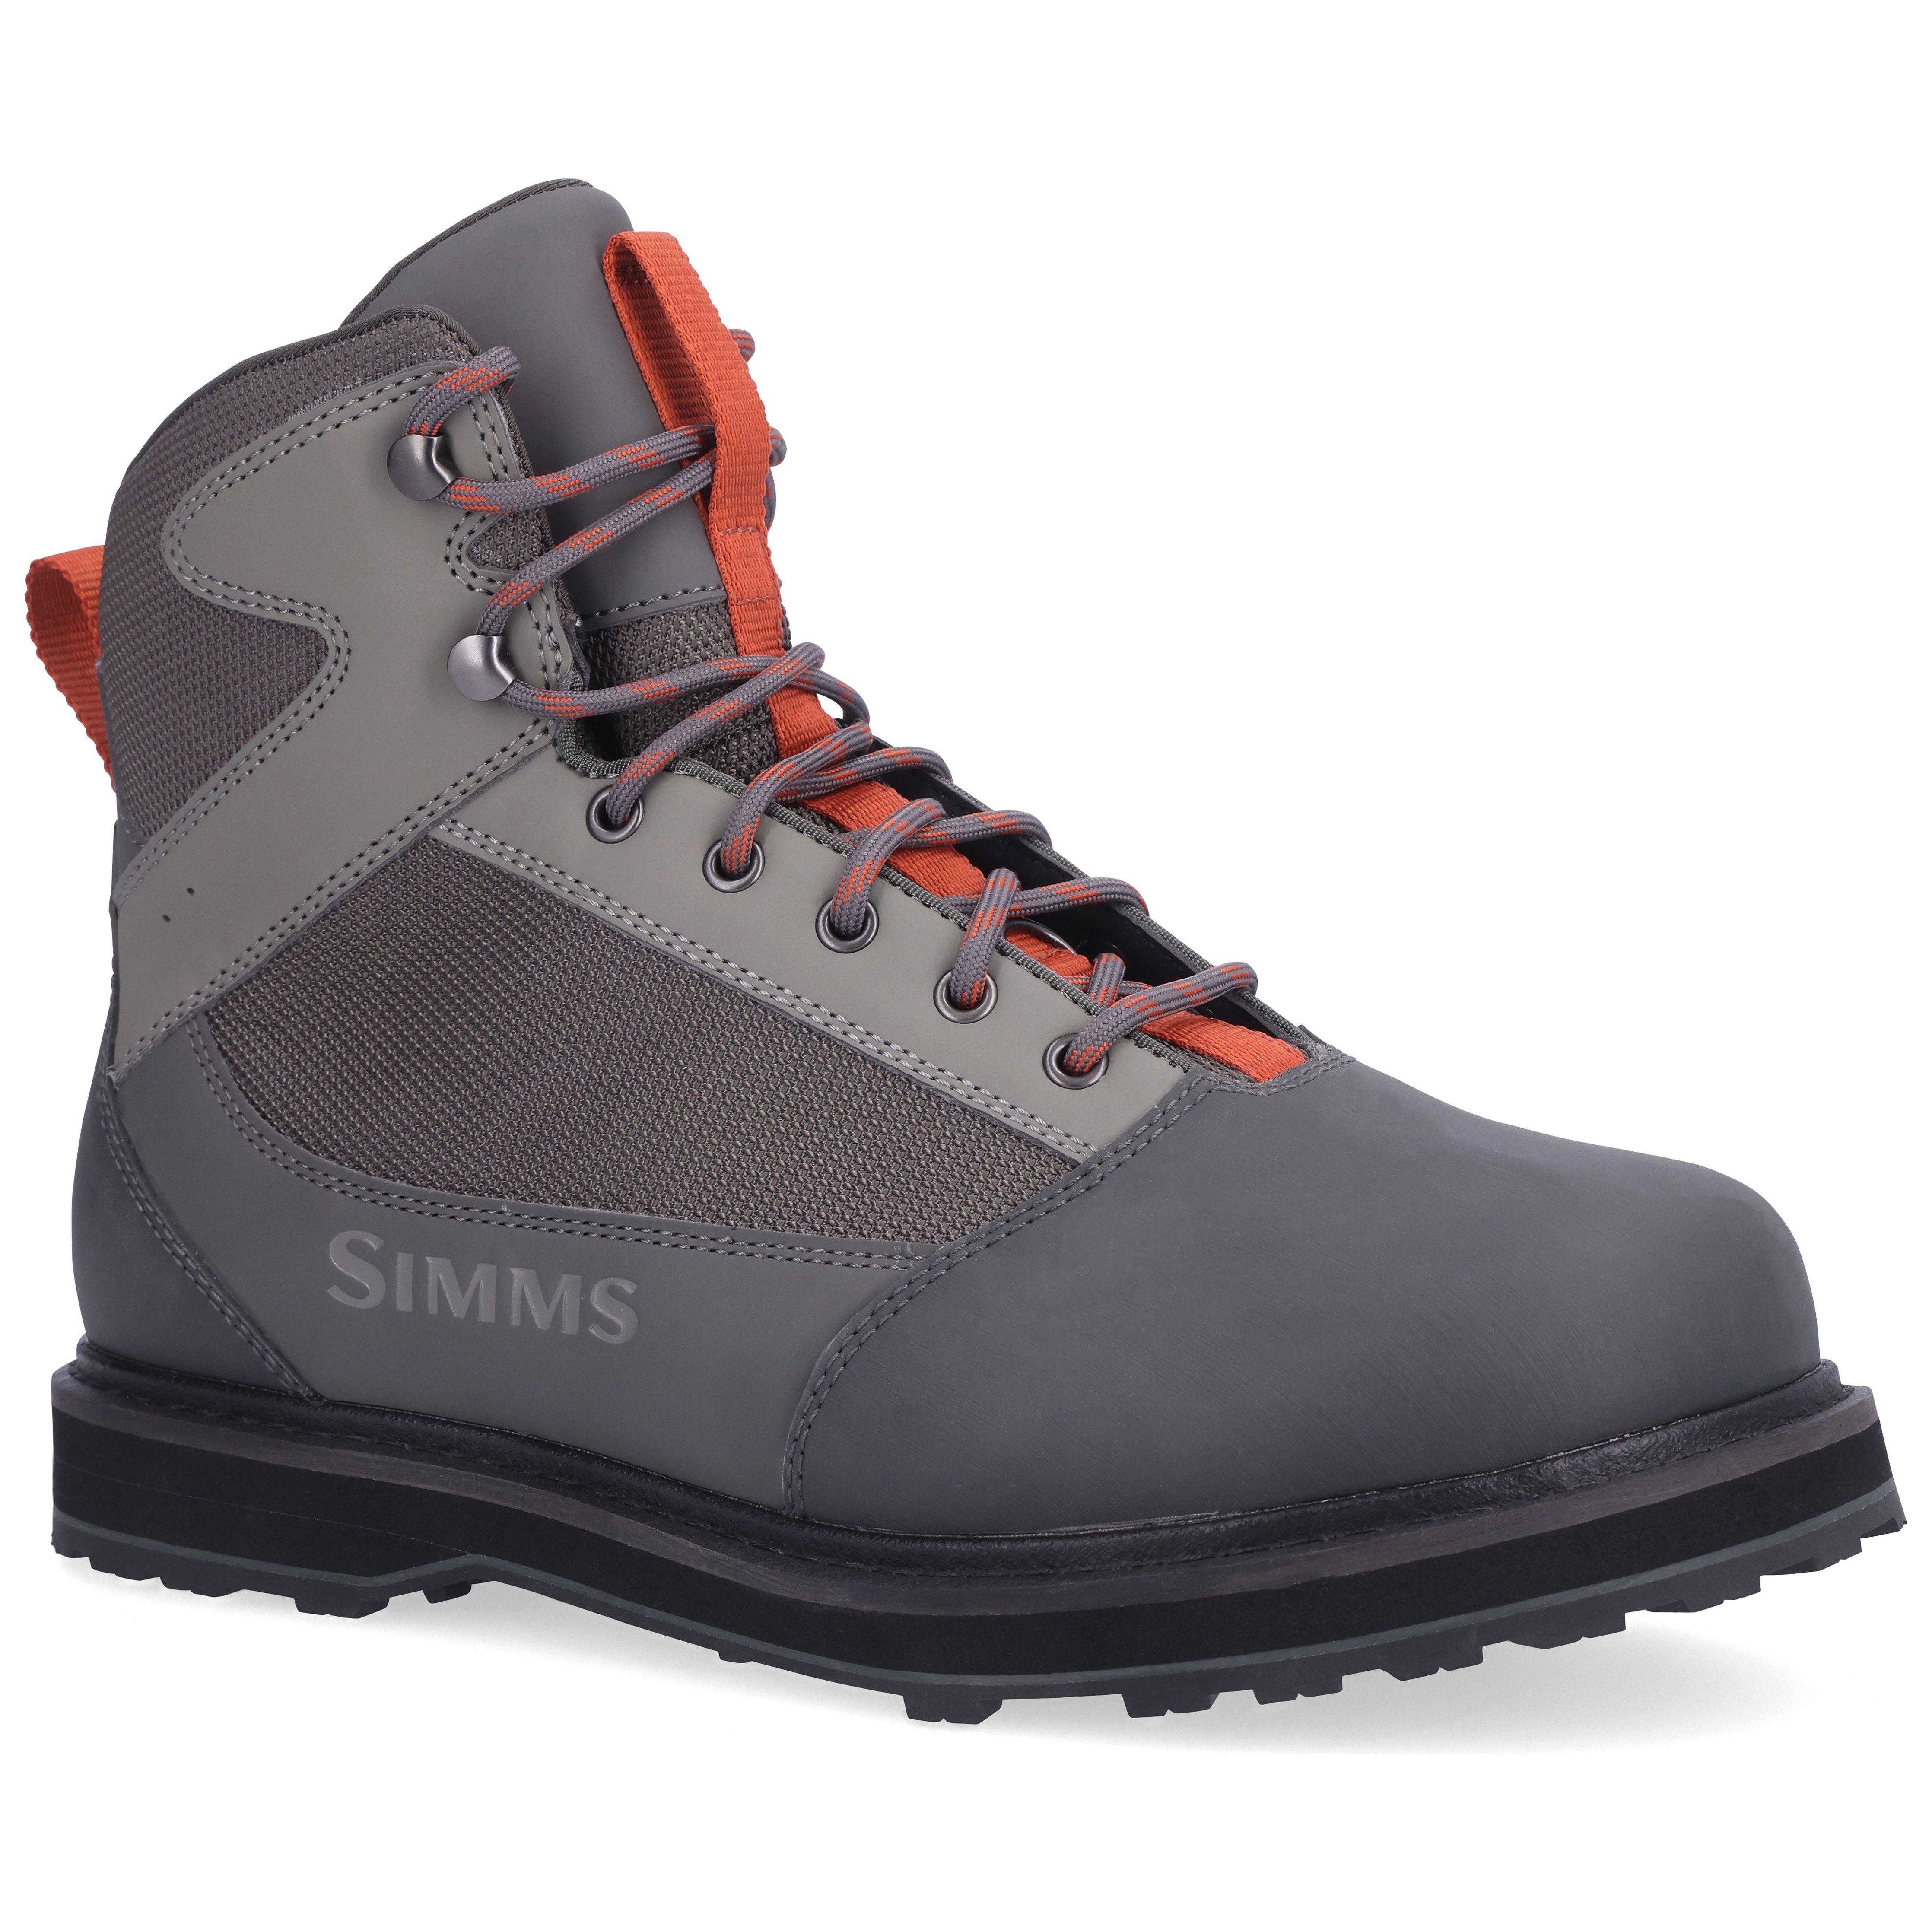 Simms Tributary Boot - Rubber Basalt Image 01